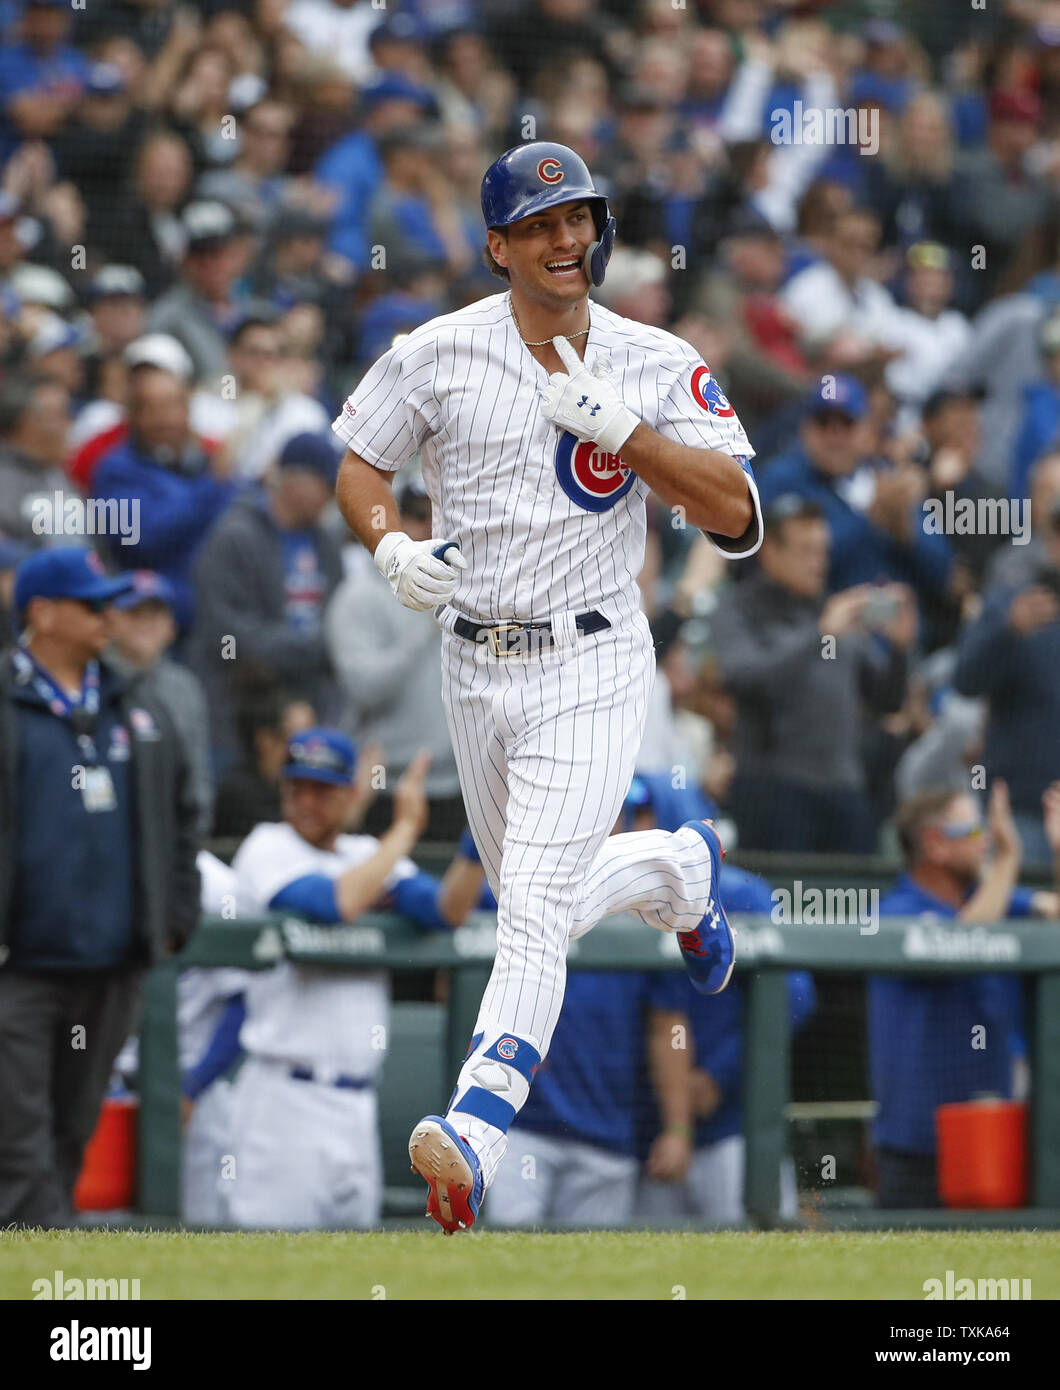 Chicago Cubs center fielder Albert Almora Jr. rounds the bases after hitting a solo home run against the Los Angeles Dodgers in the ninth inning at Wrigley Field on April 25, 2019 in Chicago. Photo by Kamil Krzaczynski/UPI Stock Photo